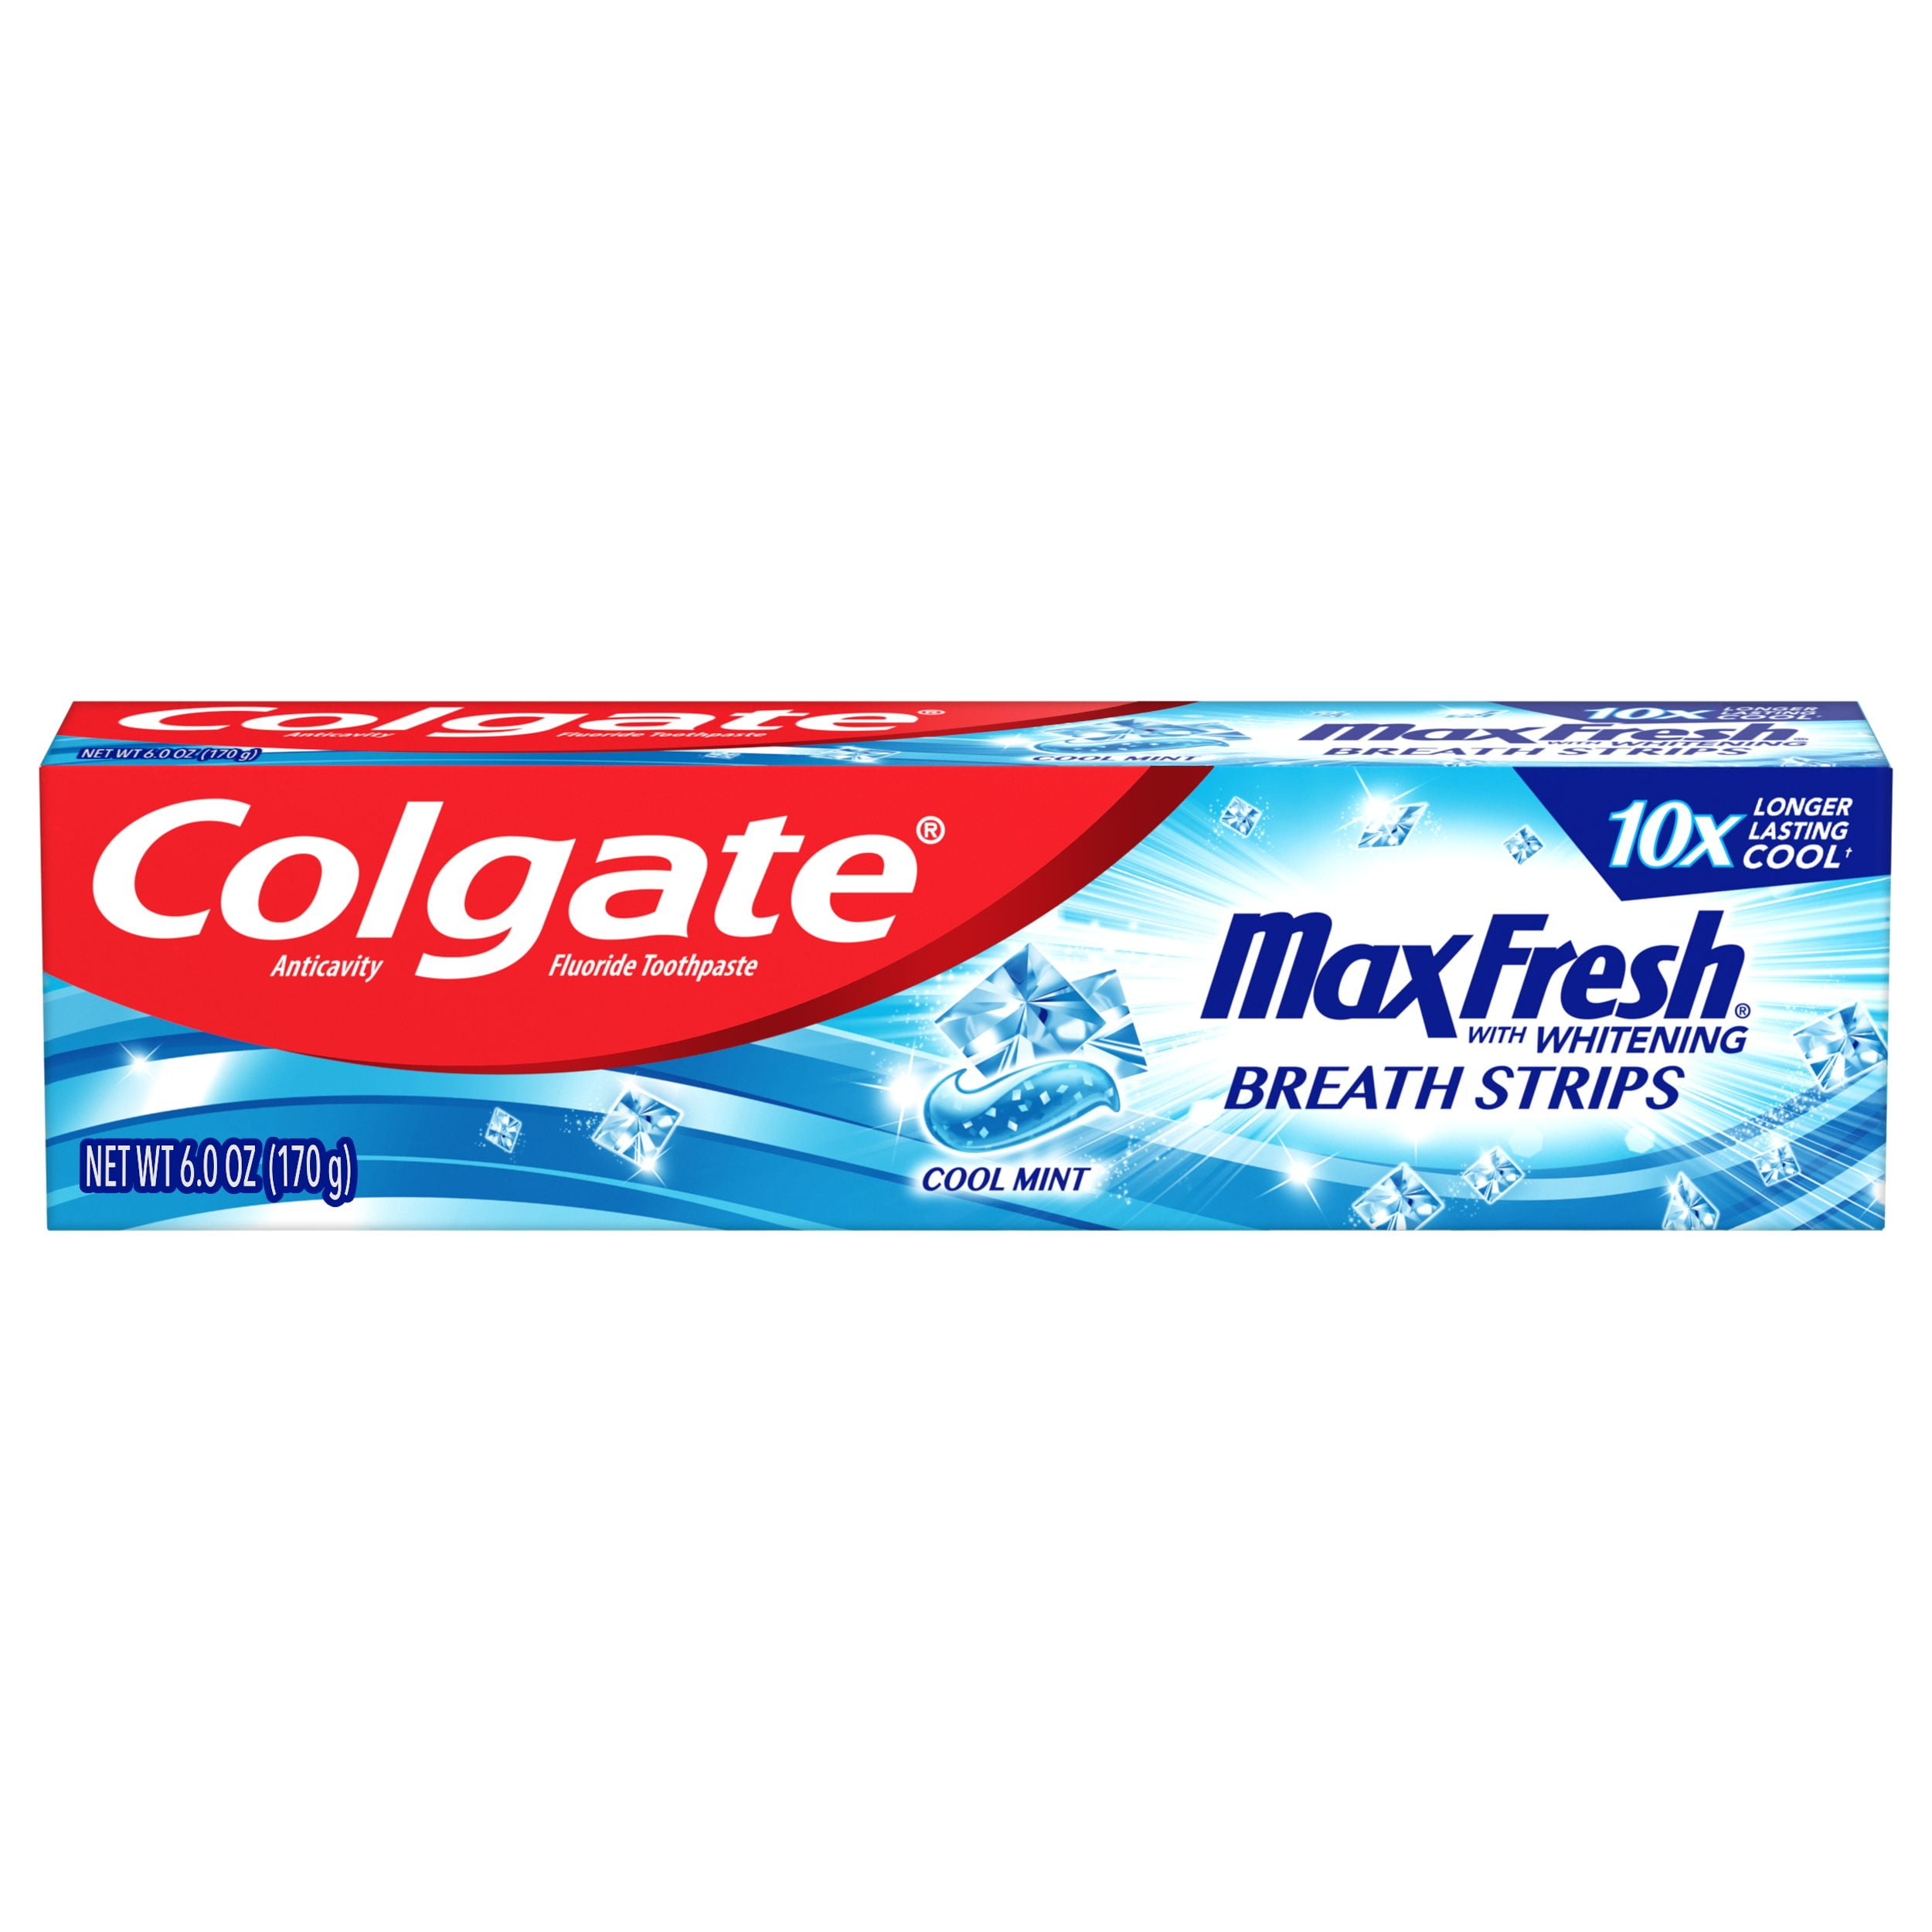 colgate-max-fresh-toothpaste-with-mini-breath-strips-cool-mint-6